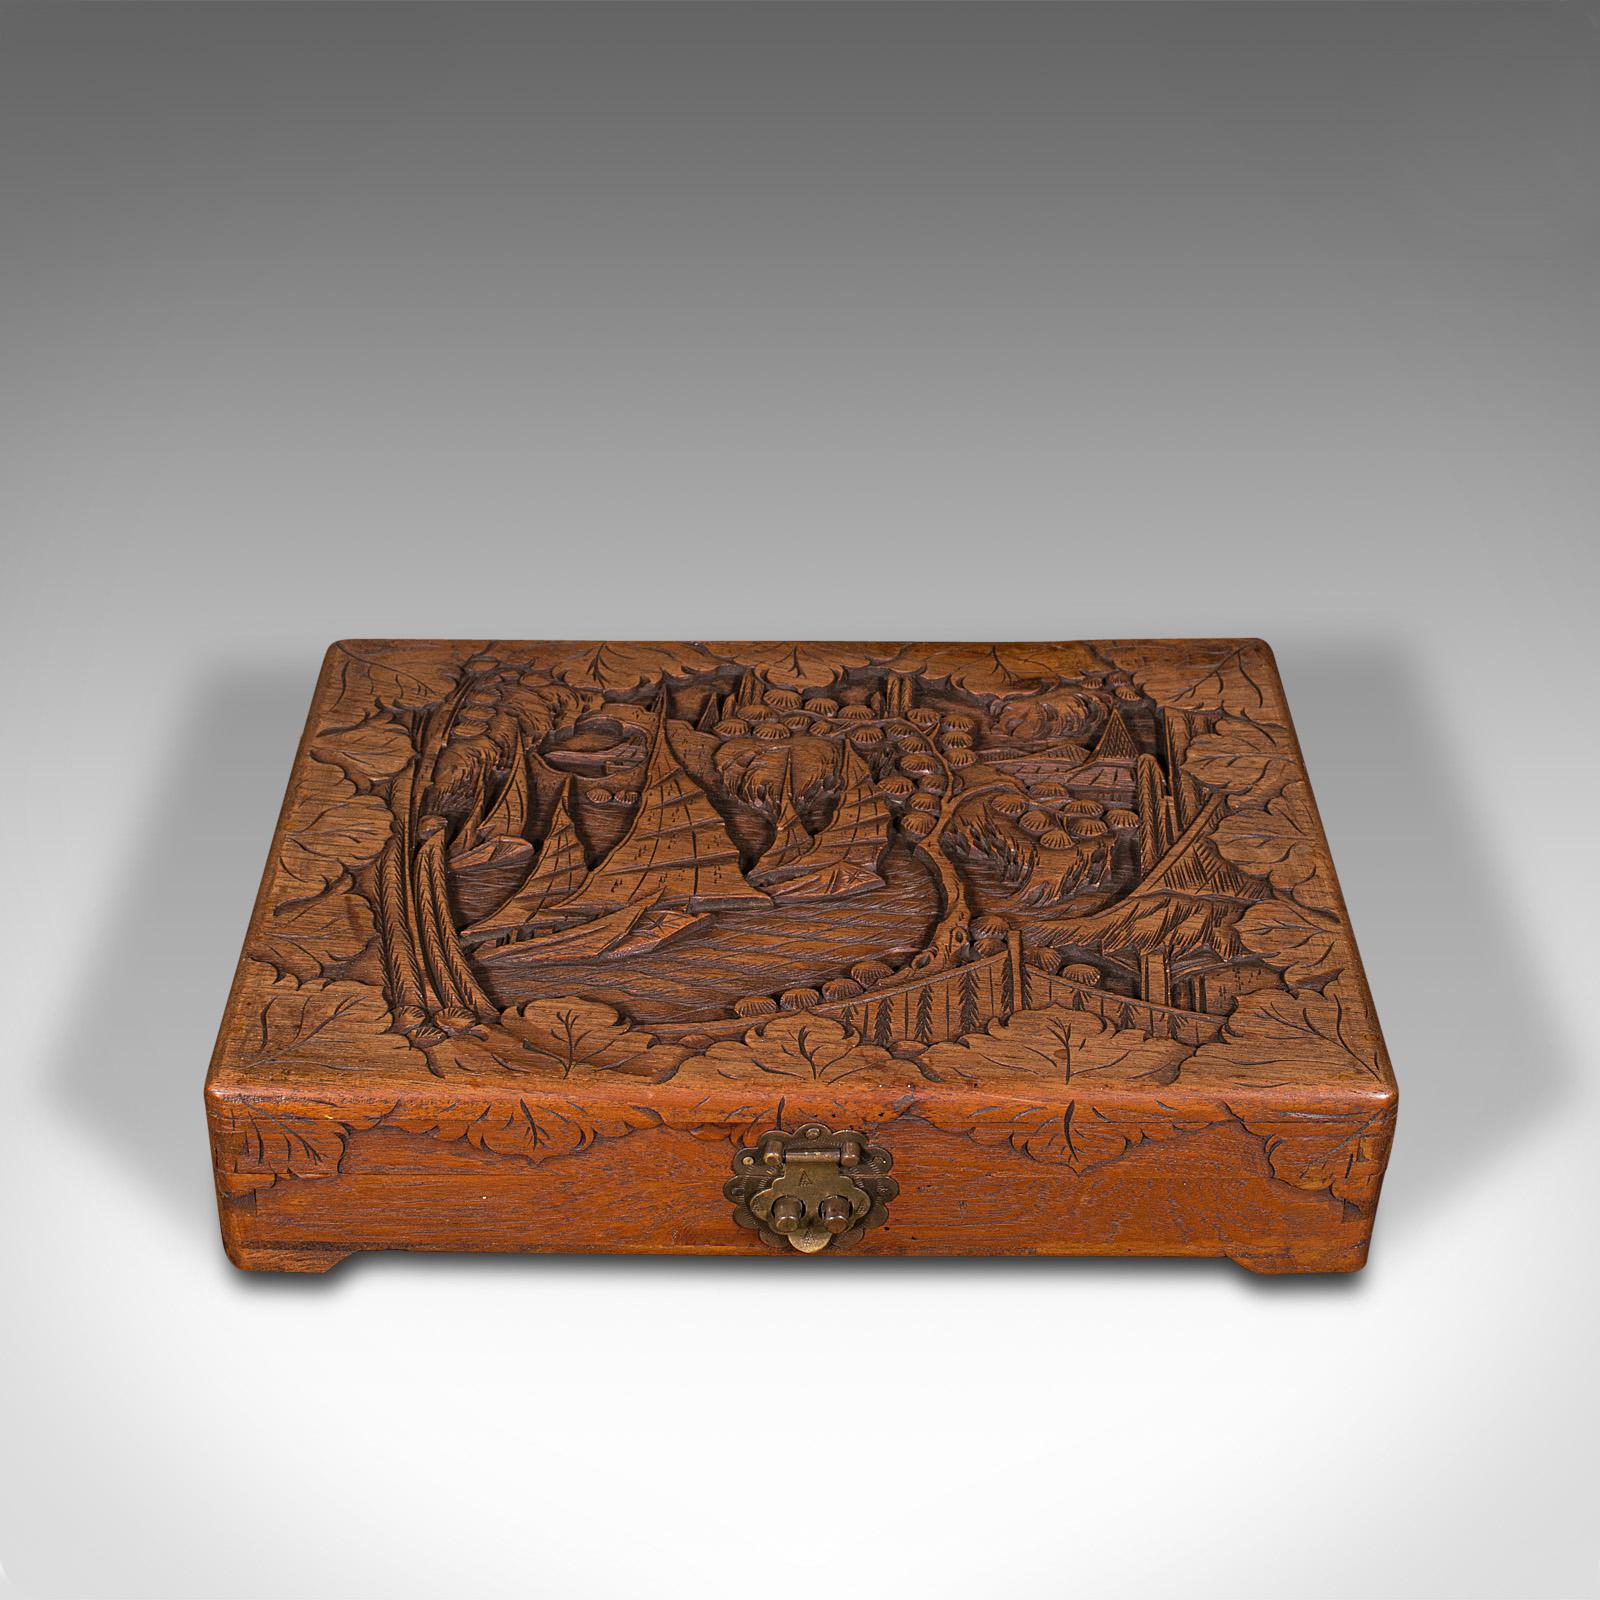 This is a vintage cased Mah Jong set. A Chinese, carved teak gaming box, dating to the late 20th century, circa 1970.

Strikingly decorative box with 144-piece game inside
Displays a desirable aged patina throughout
Teak case enthusiastically